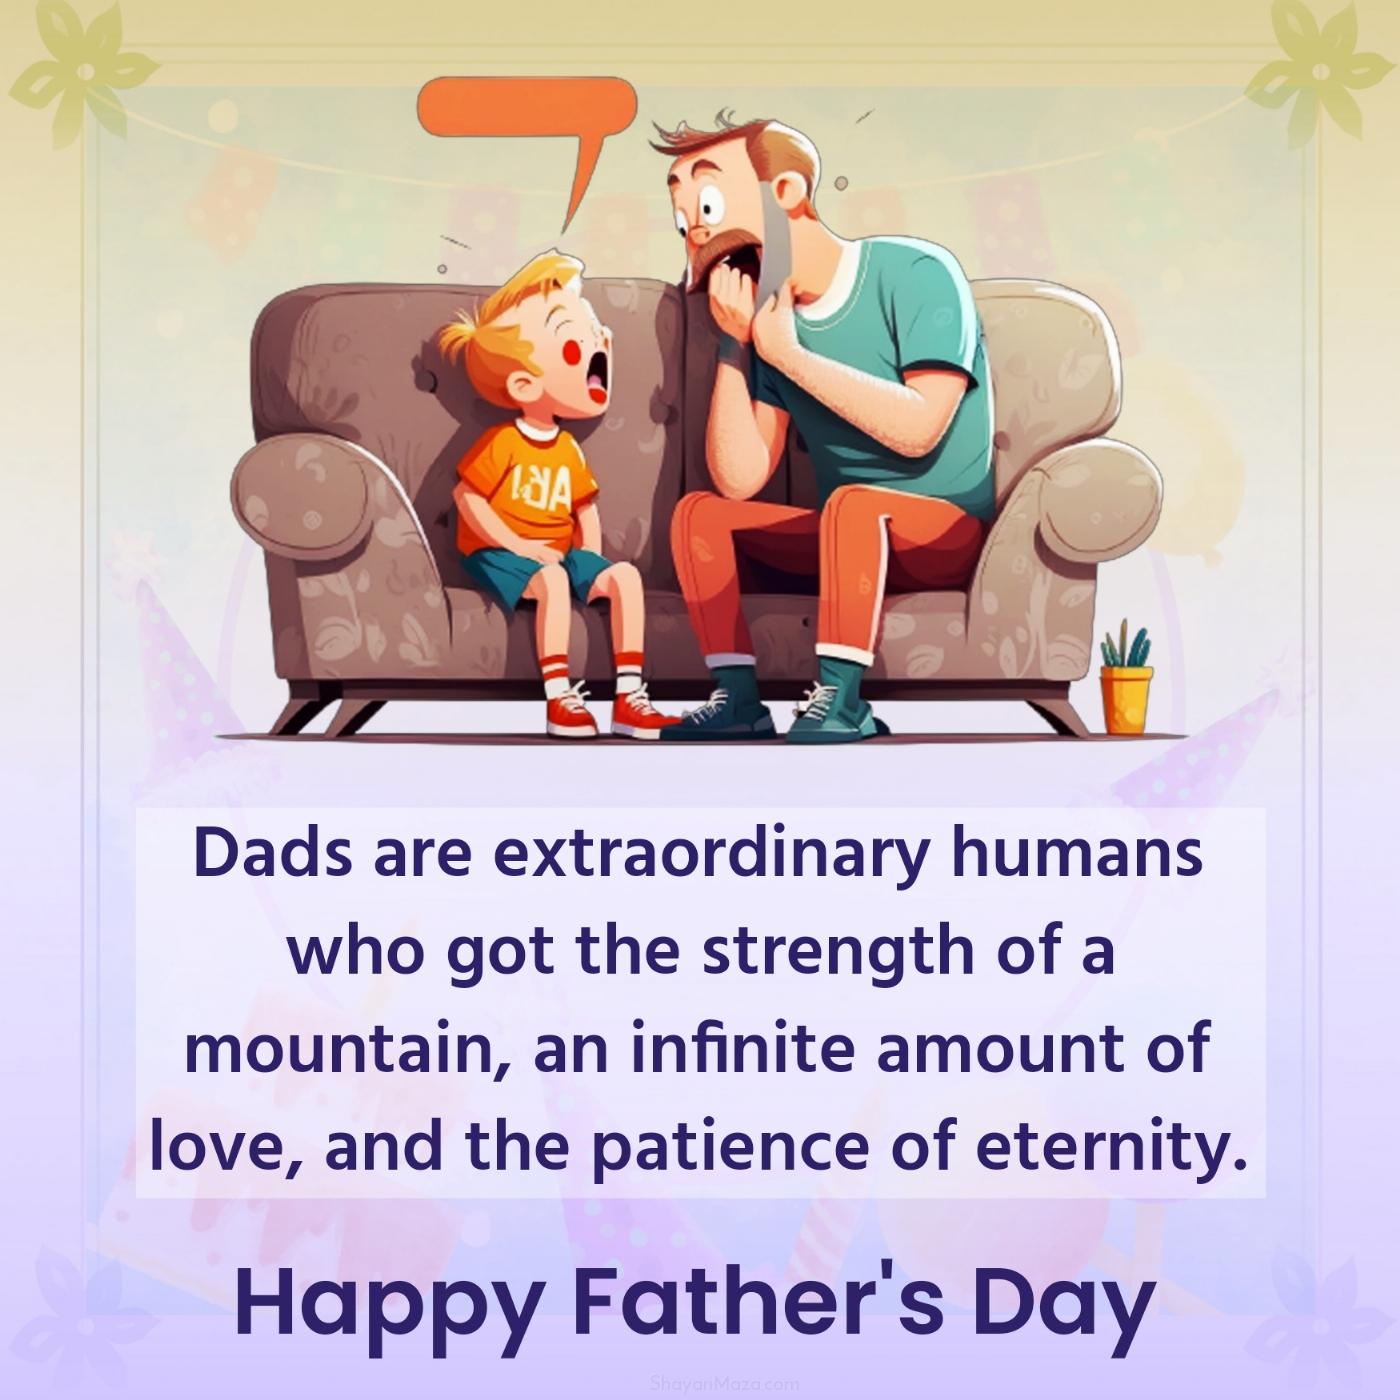 Dads are extraordinary humans who got the strength of a mountain